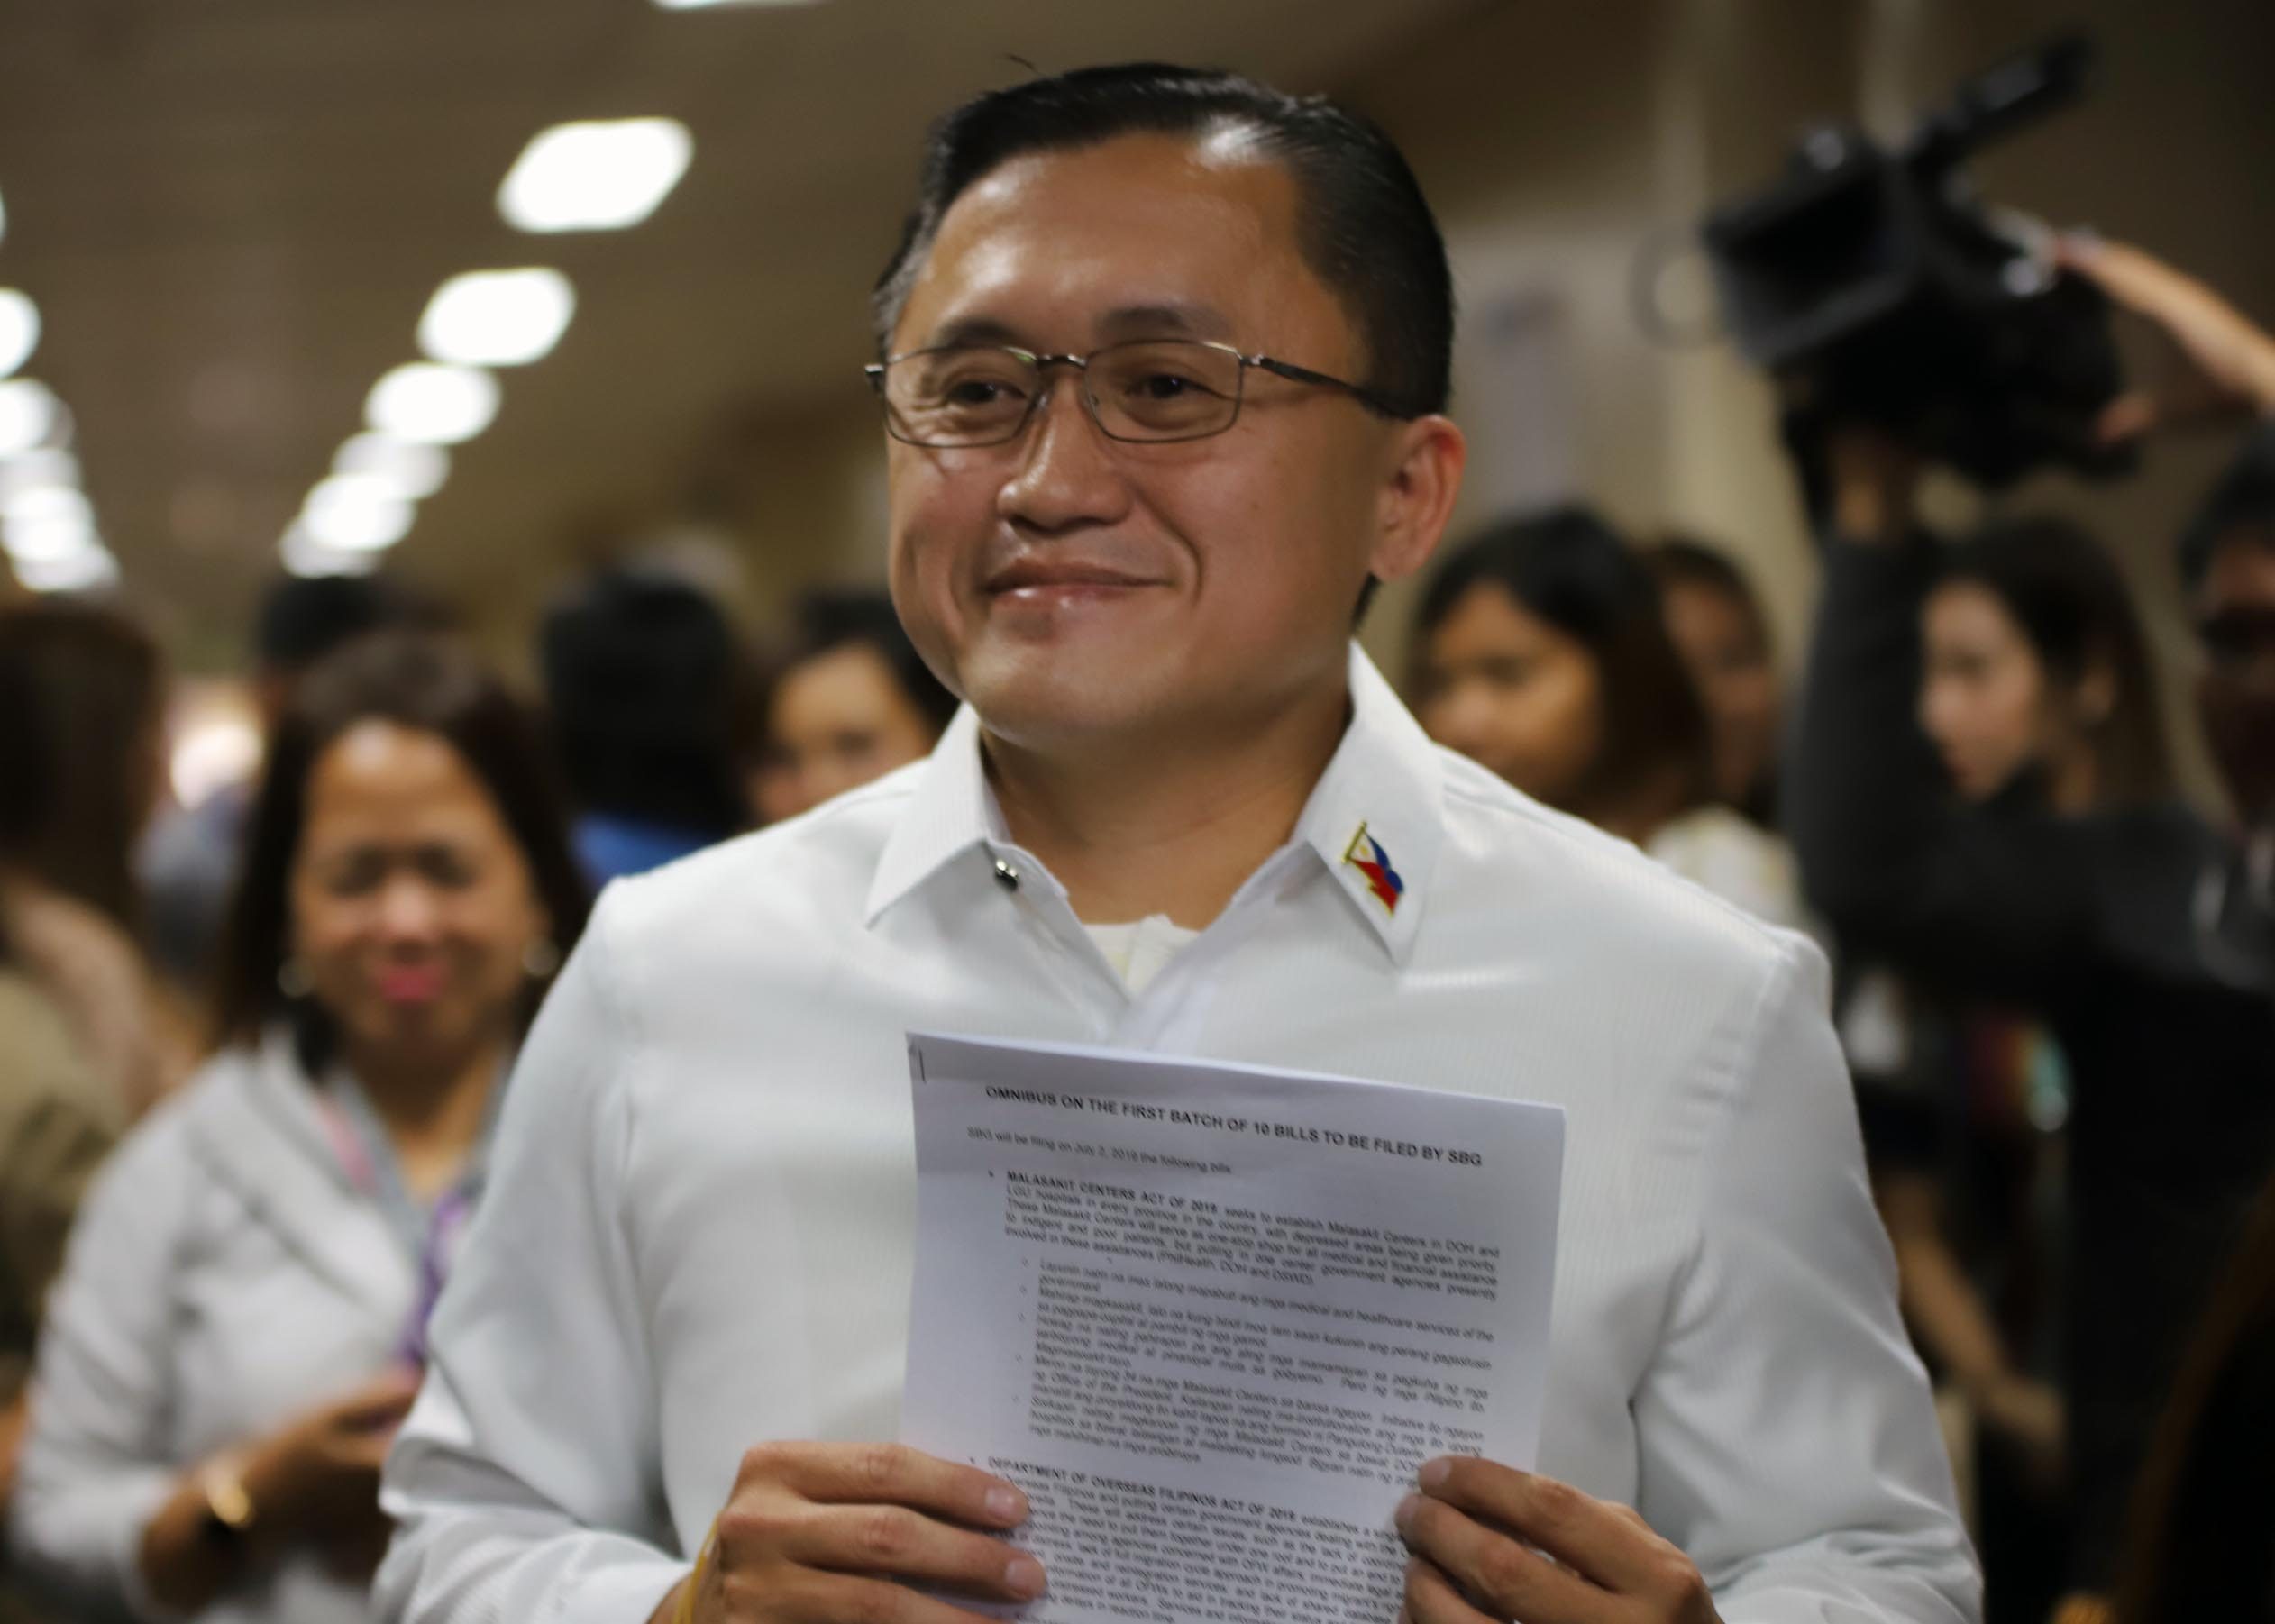 P5.7M in donations go to Bong Go ‘social media boosting’ for 2019 polls